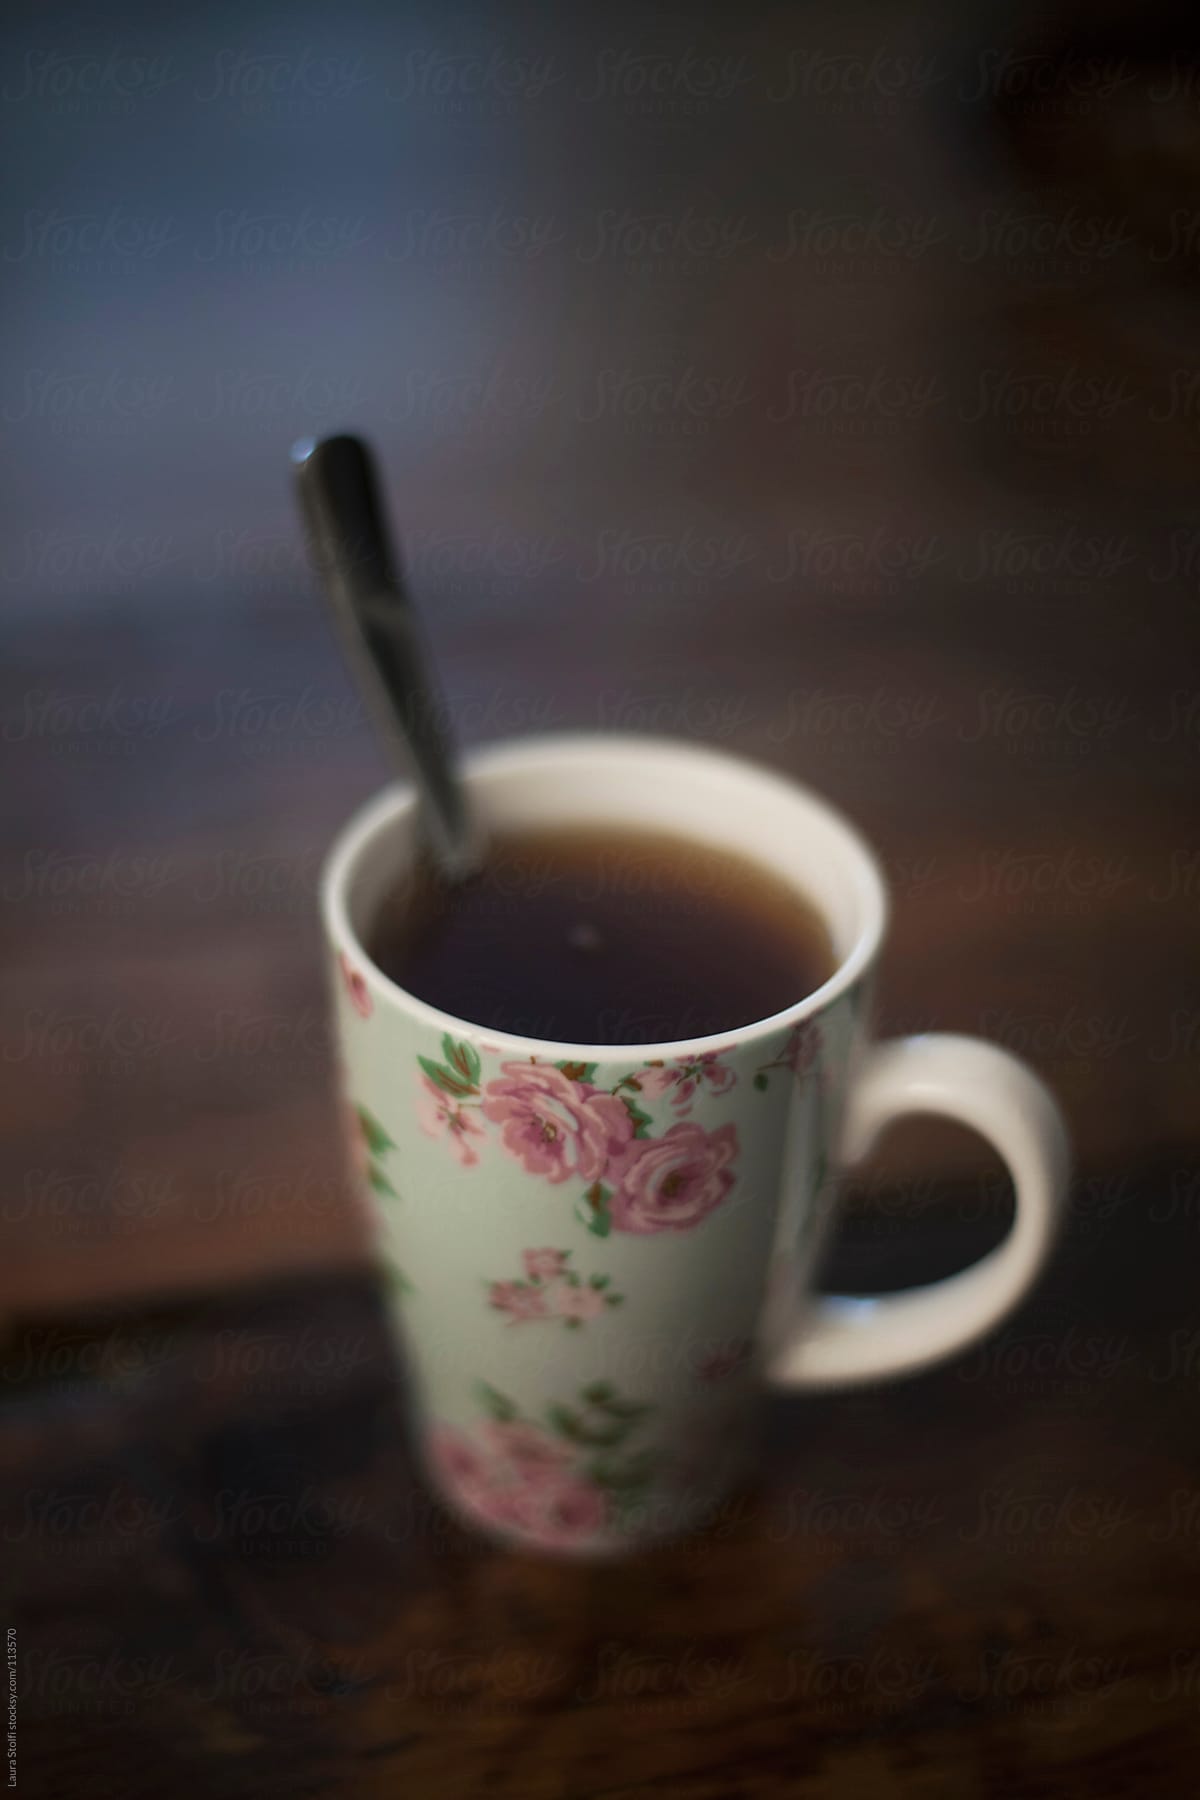 Close-up of flowered china tea mug and spoon on wooden table